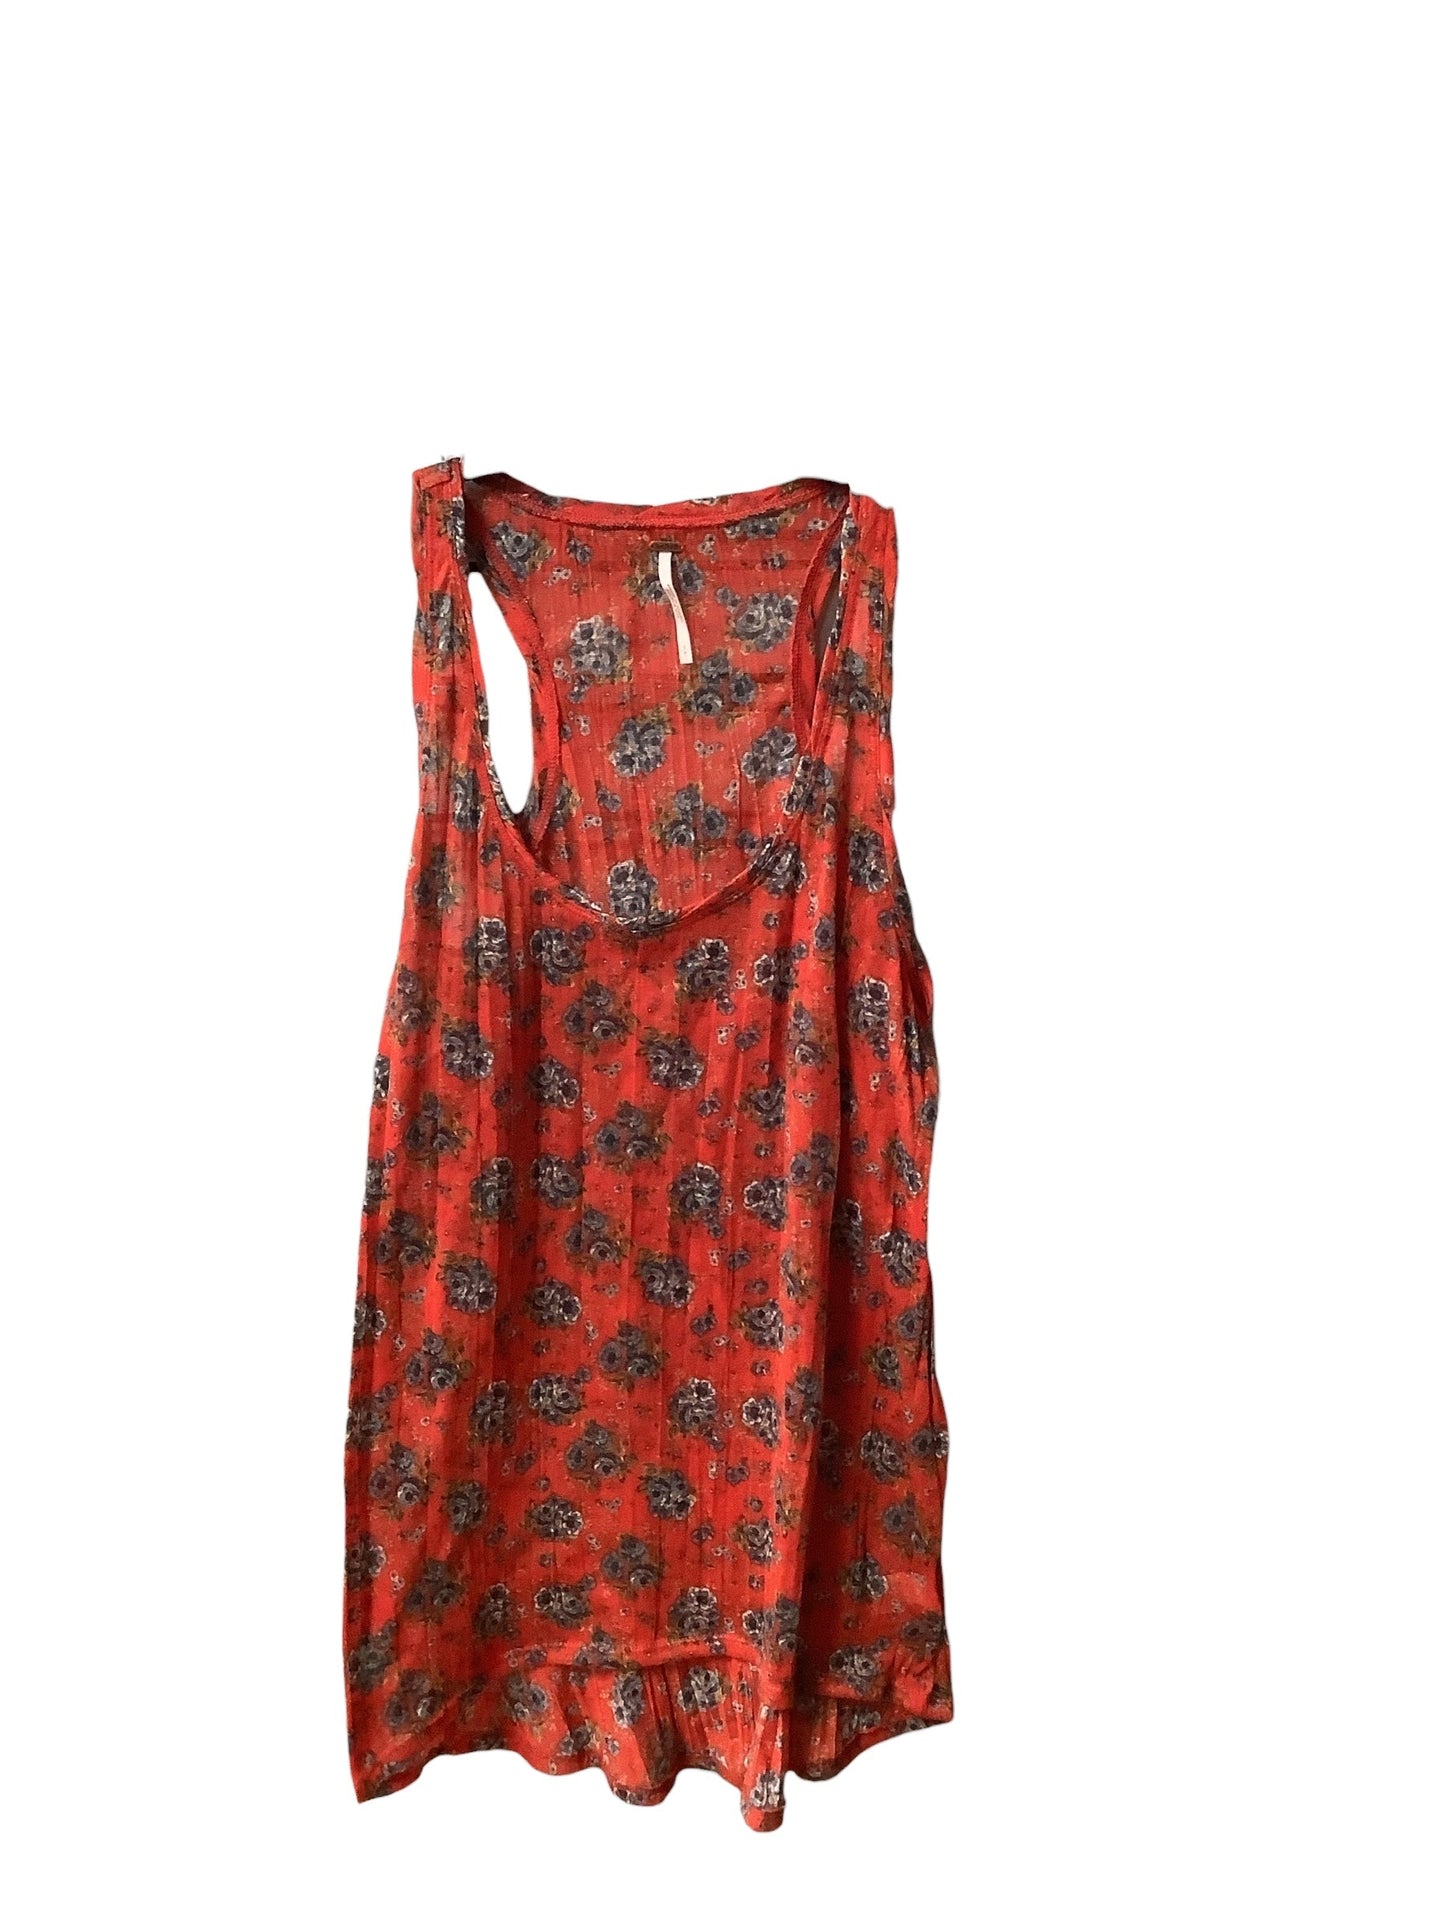 Floral Print Tank Top Free People, Size S